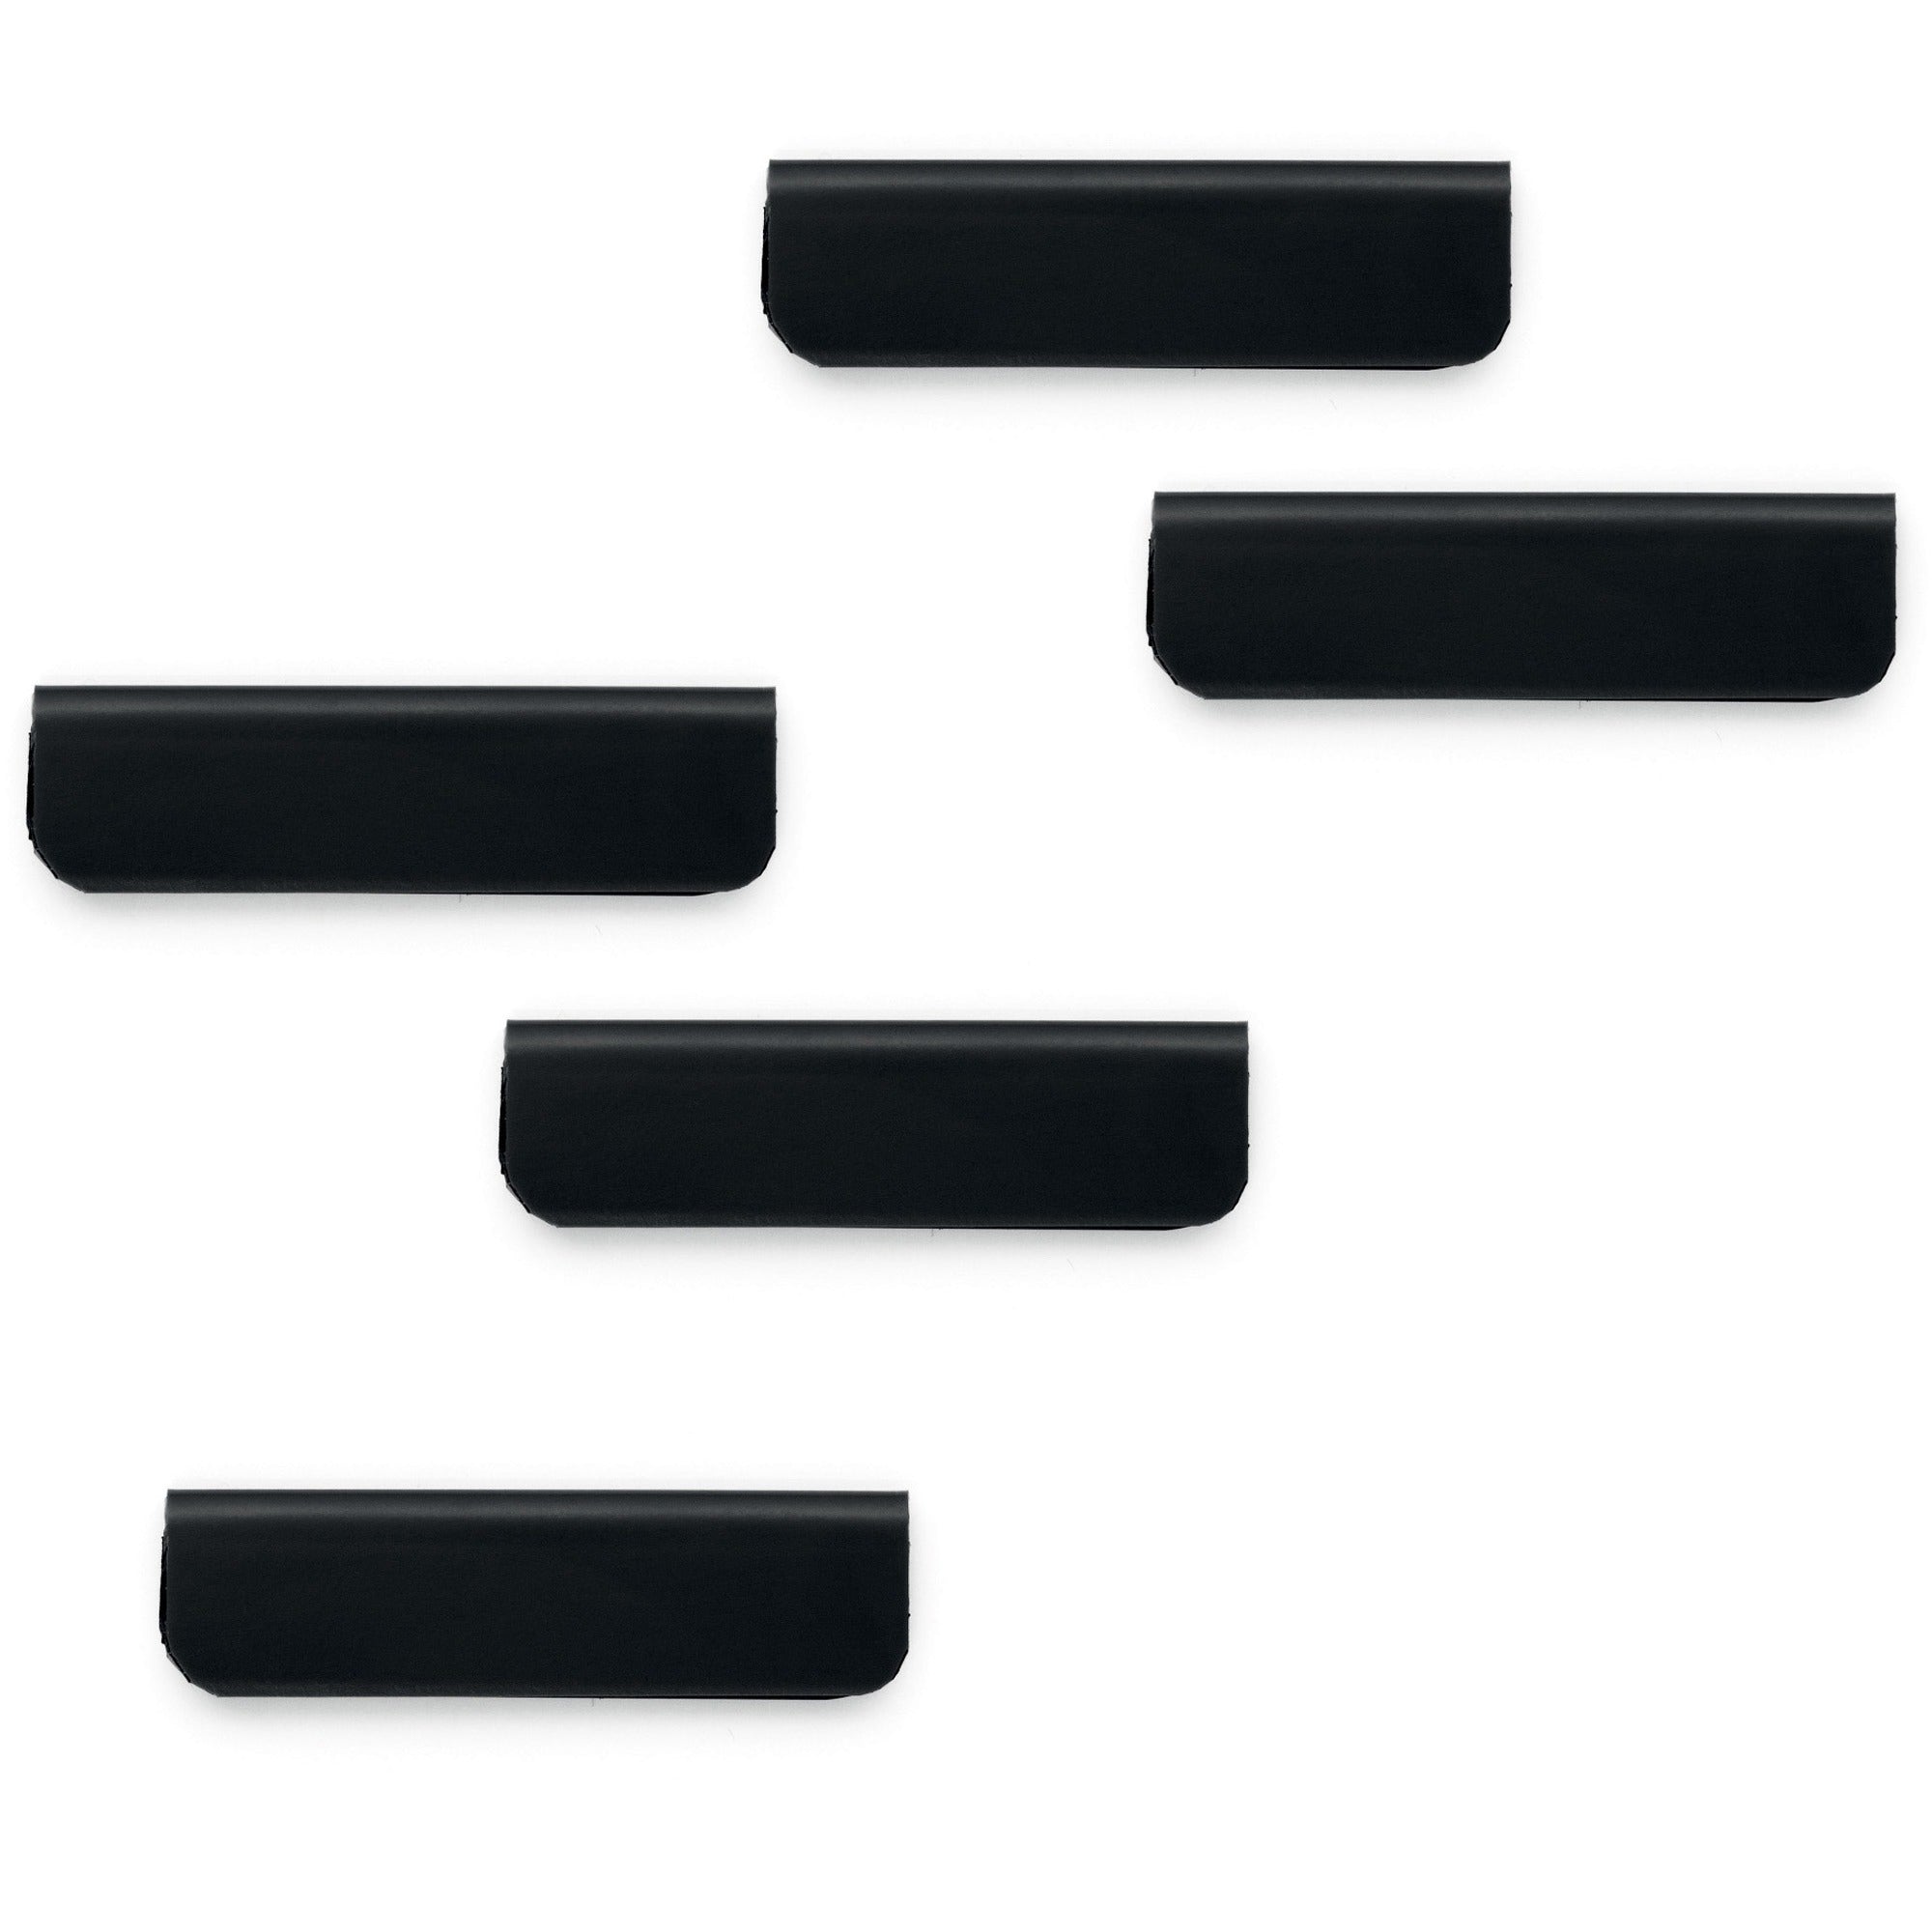 durable-durafix-clip-24-width-for-notes-door-reminder-glass-refrigerator-cabinet-appointment-reminder-residue-free-easy-to-use-5pack-black_dbl470501 - 1